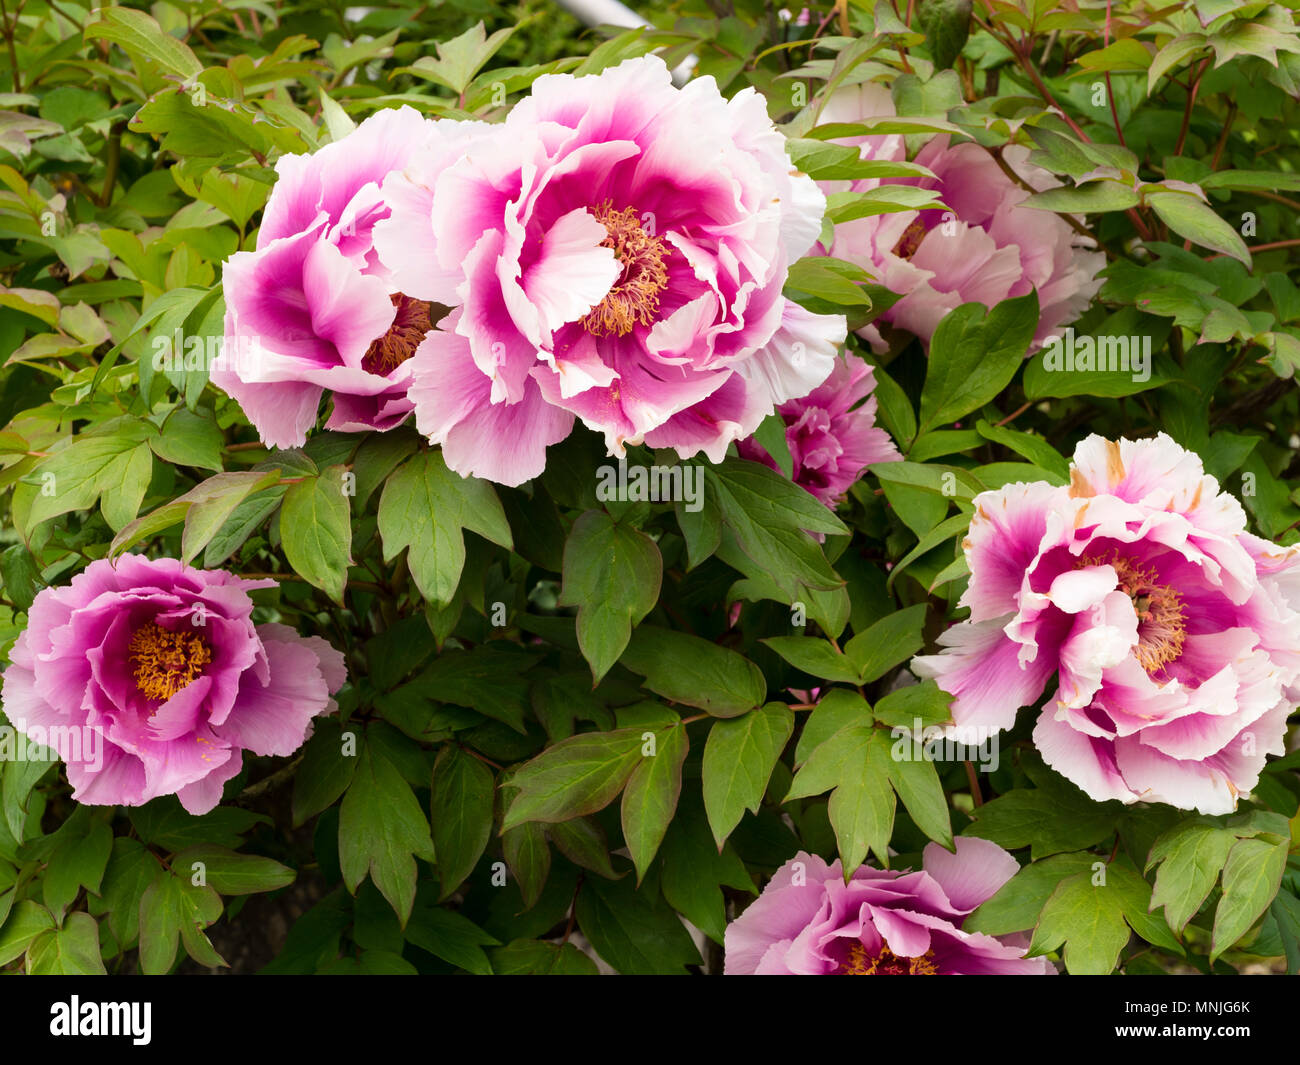 Massive pink flowers of the Moutan or Chiunese tree peony, Paeonia suffructicosa Stock Photo